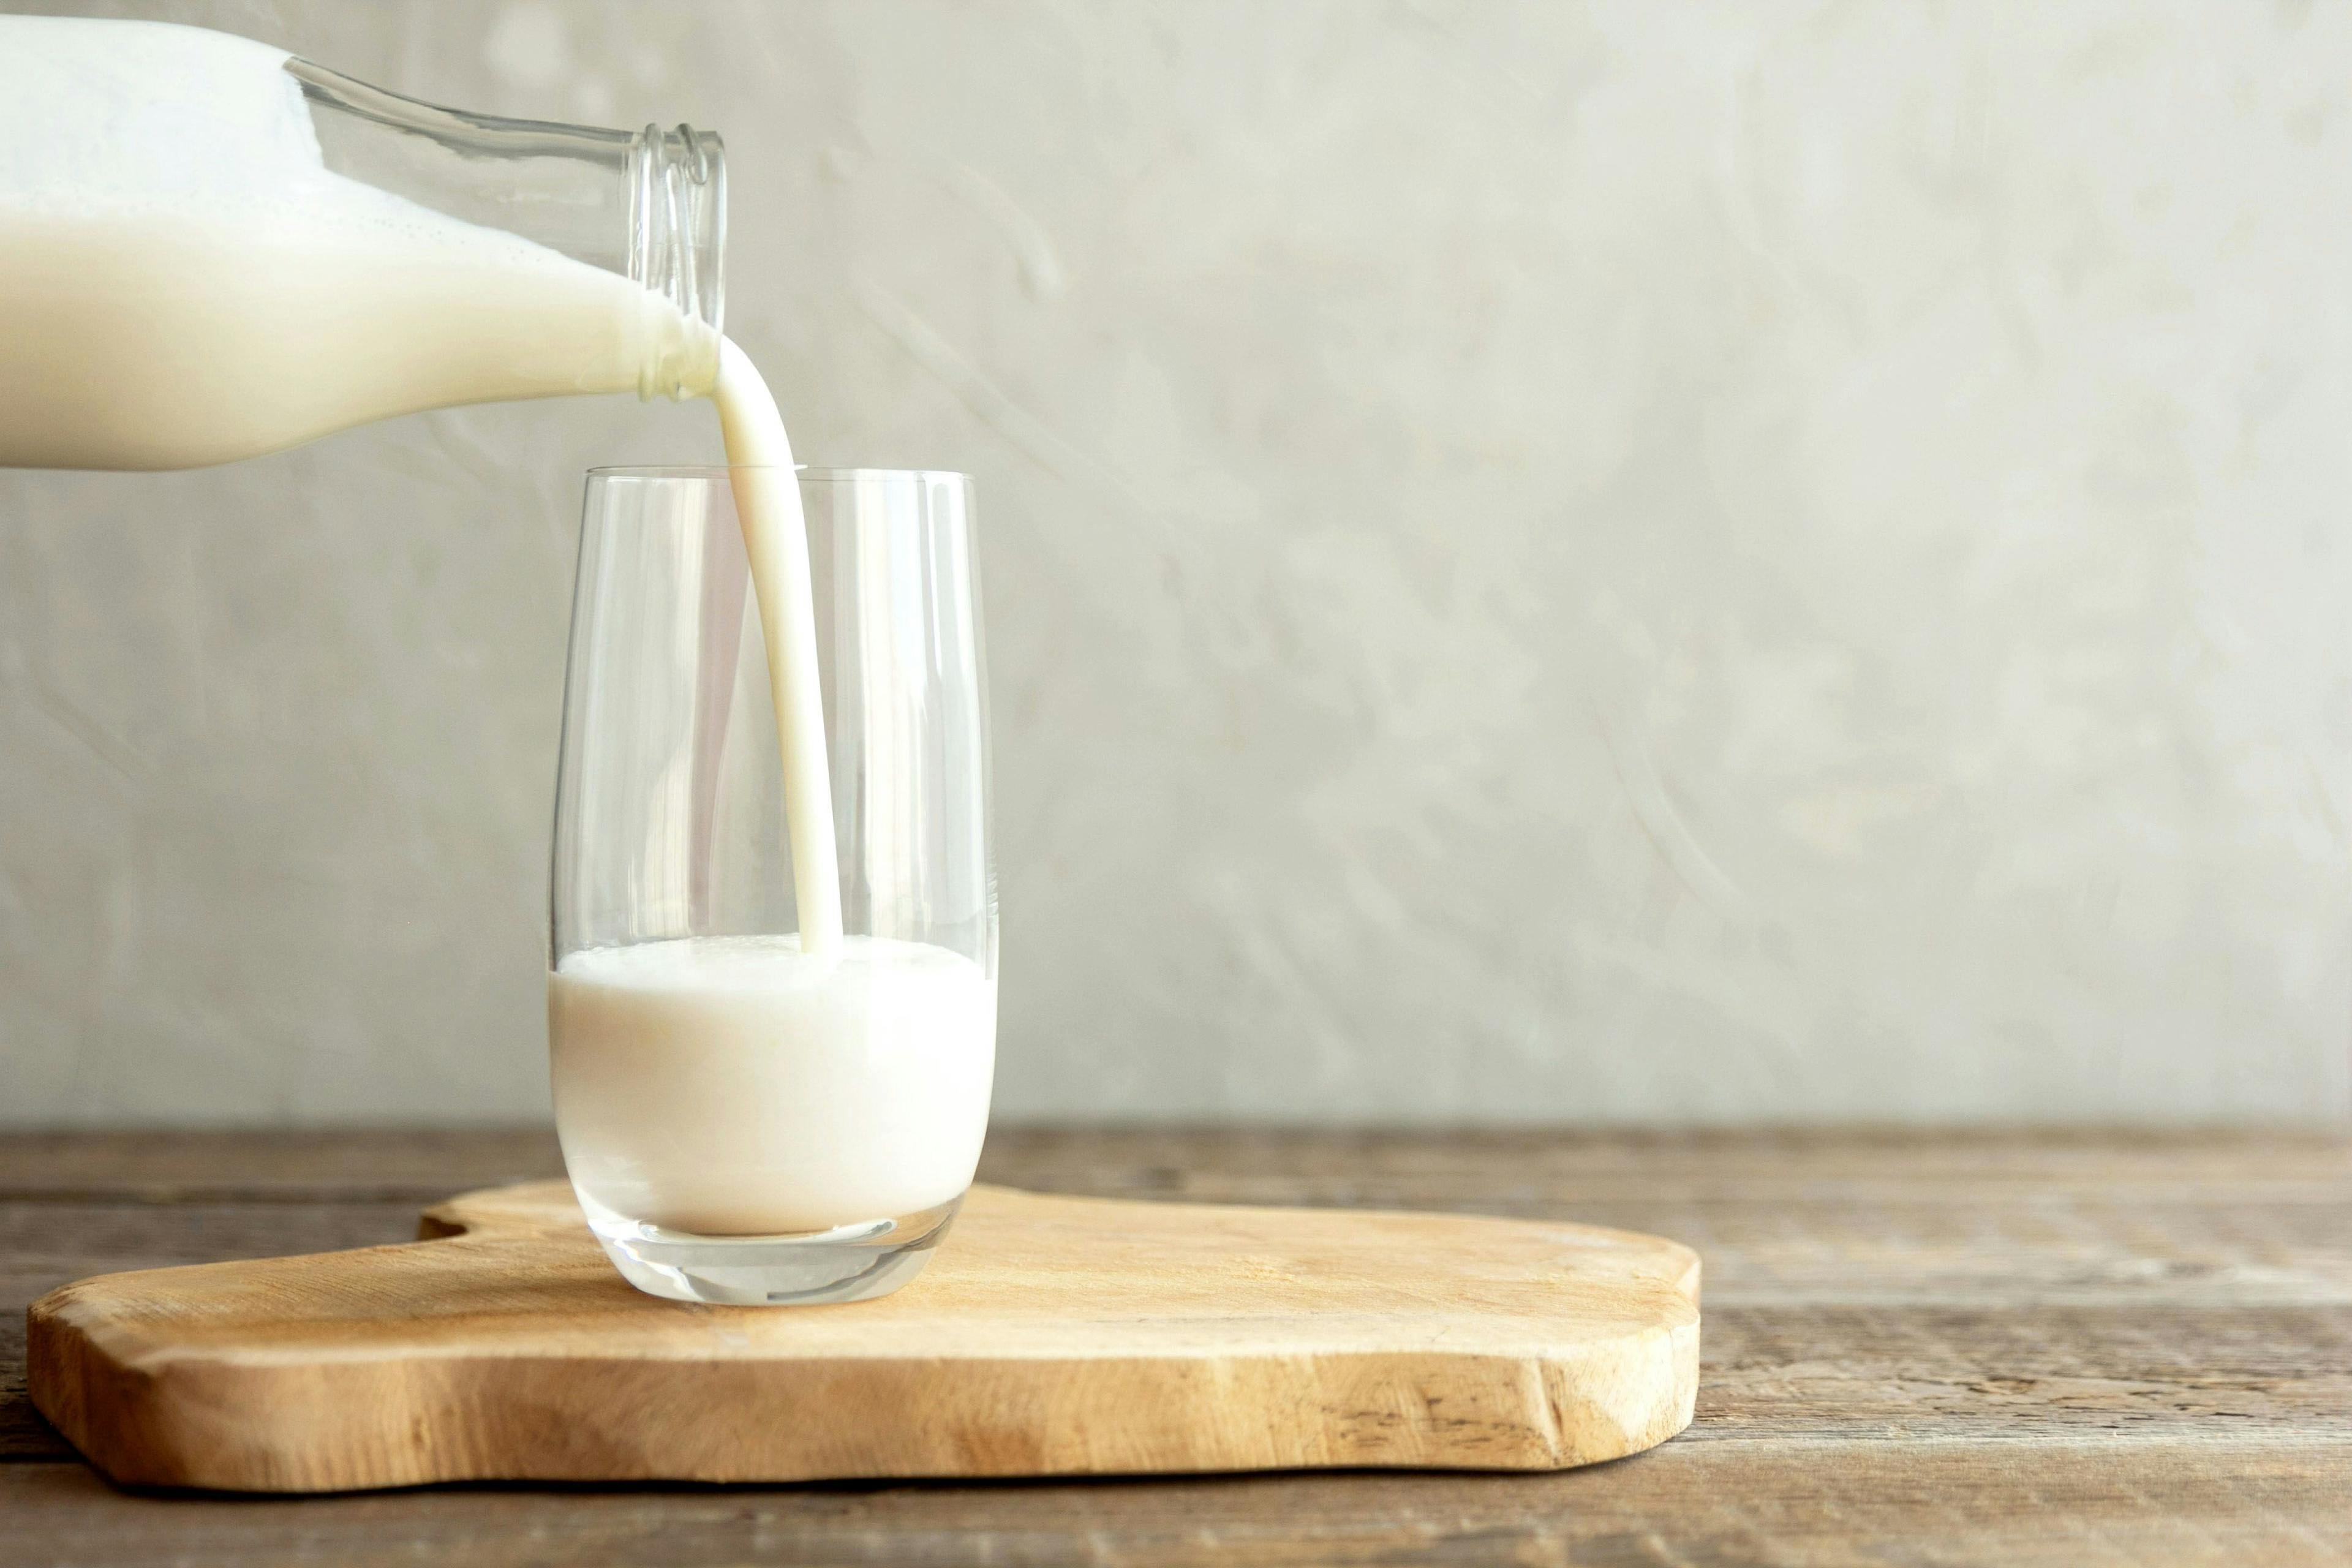 Kefir, milk or Turkish Ayran drink are poured into a glass cup from a bottle. A glass stands on a wooden stand on a rustic wooden table. | Image Credit: © Elena Medoks - stock.adobe.com